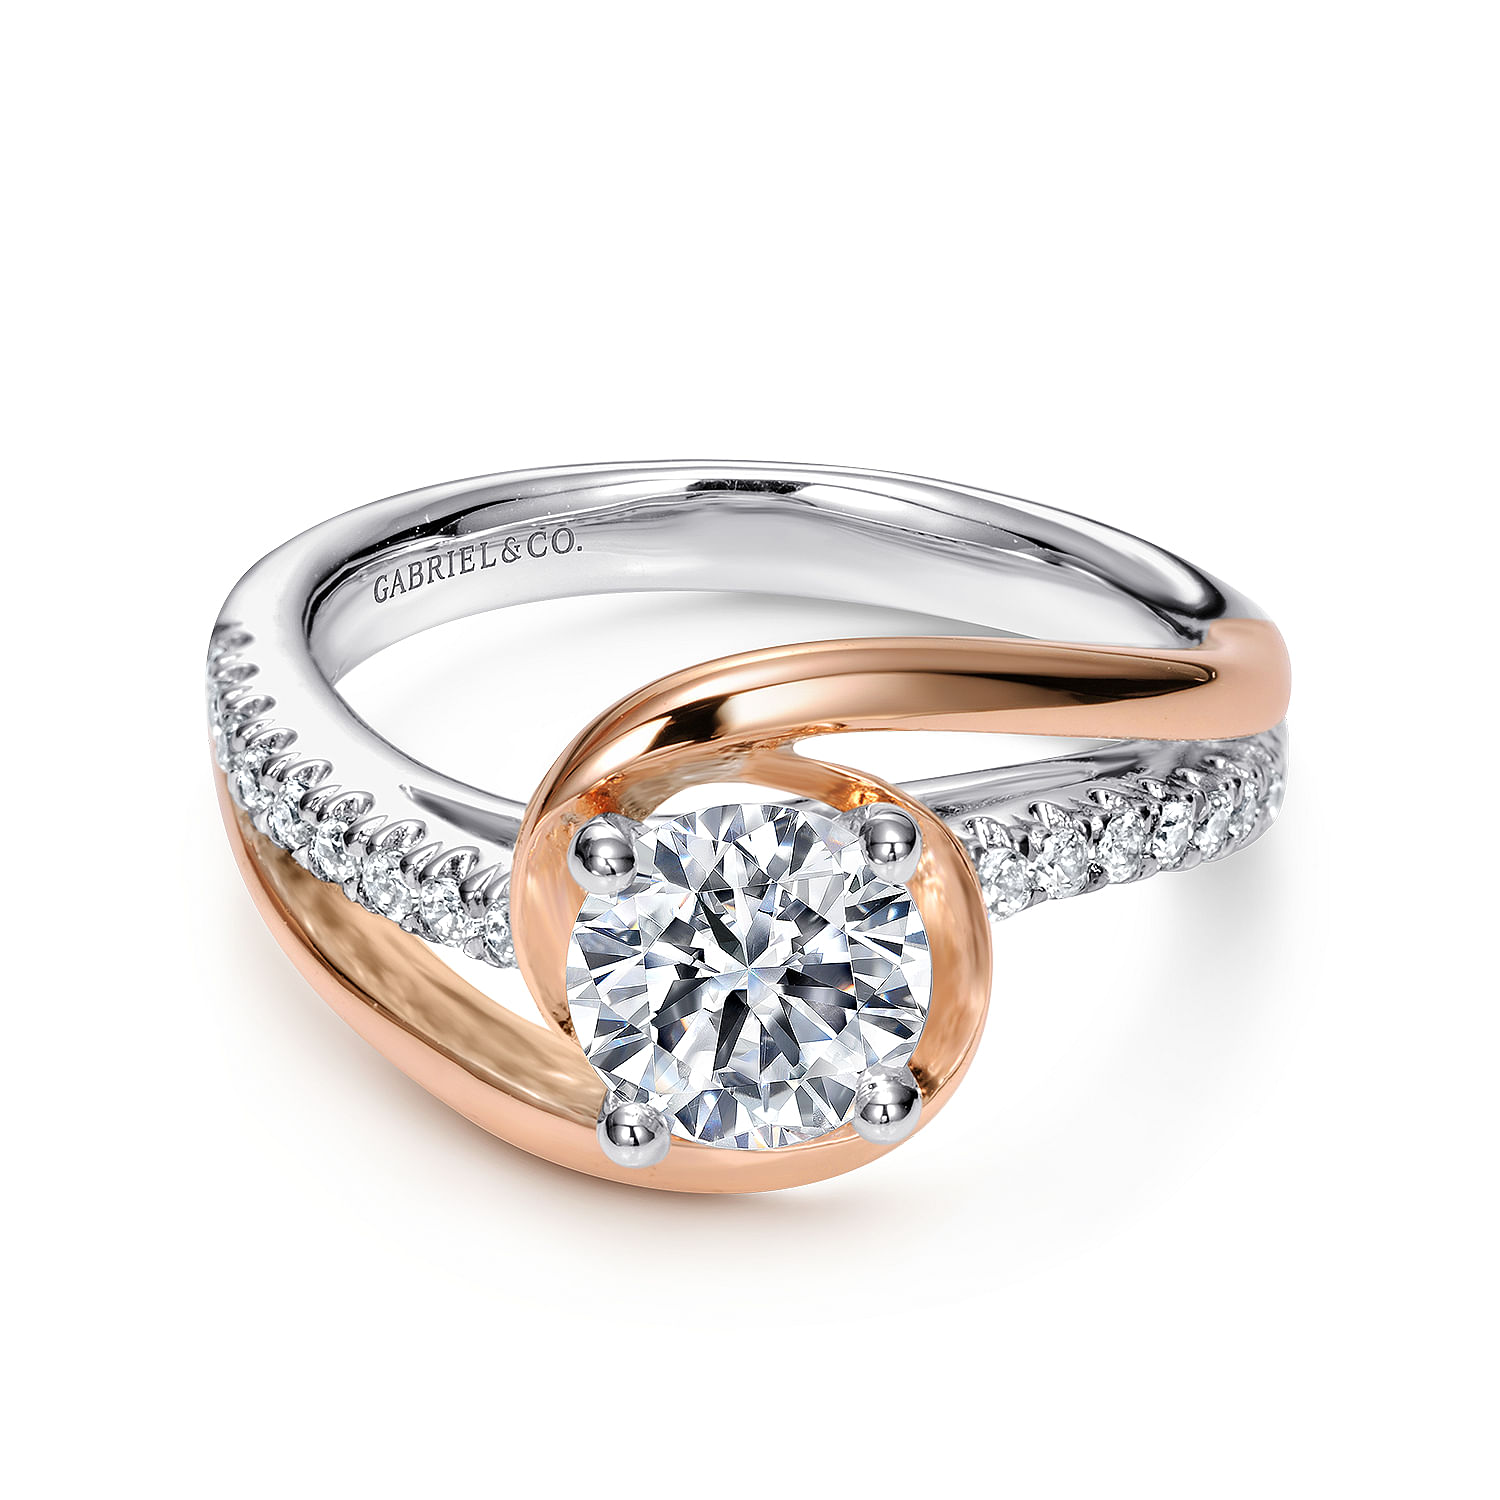 Lucca - 14K White-Rose Gold Round Diamond Bypass Engagement Ring